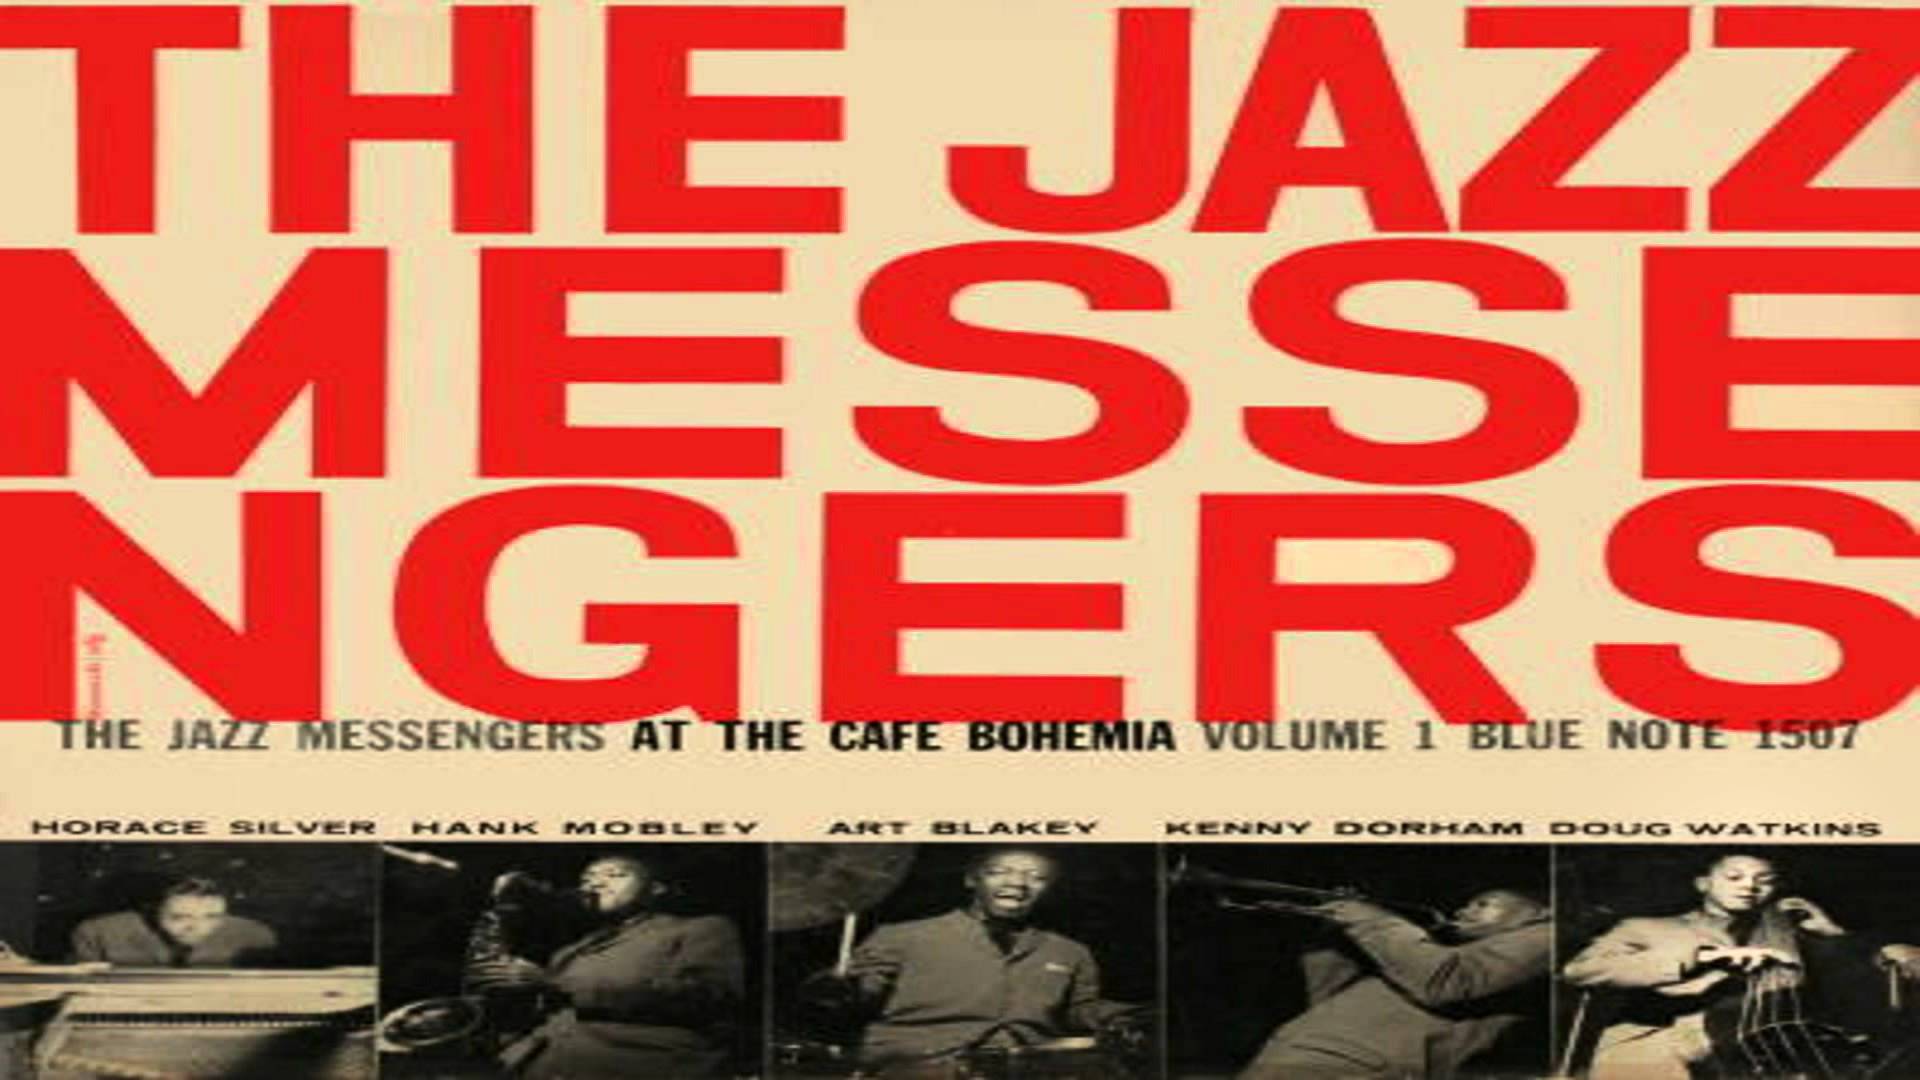 Amazing Art Blakey & The Jazz Messengers Pictures & Backgrounds